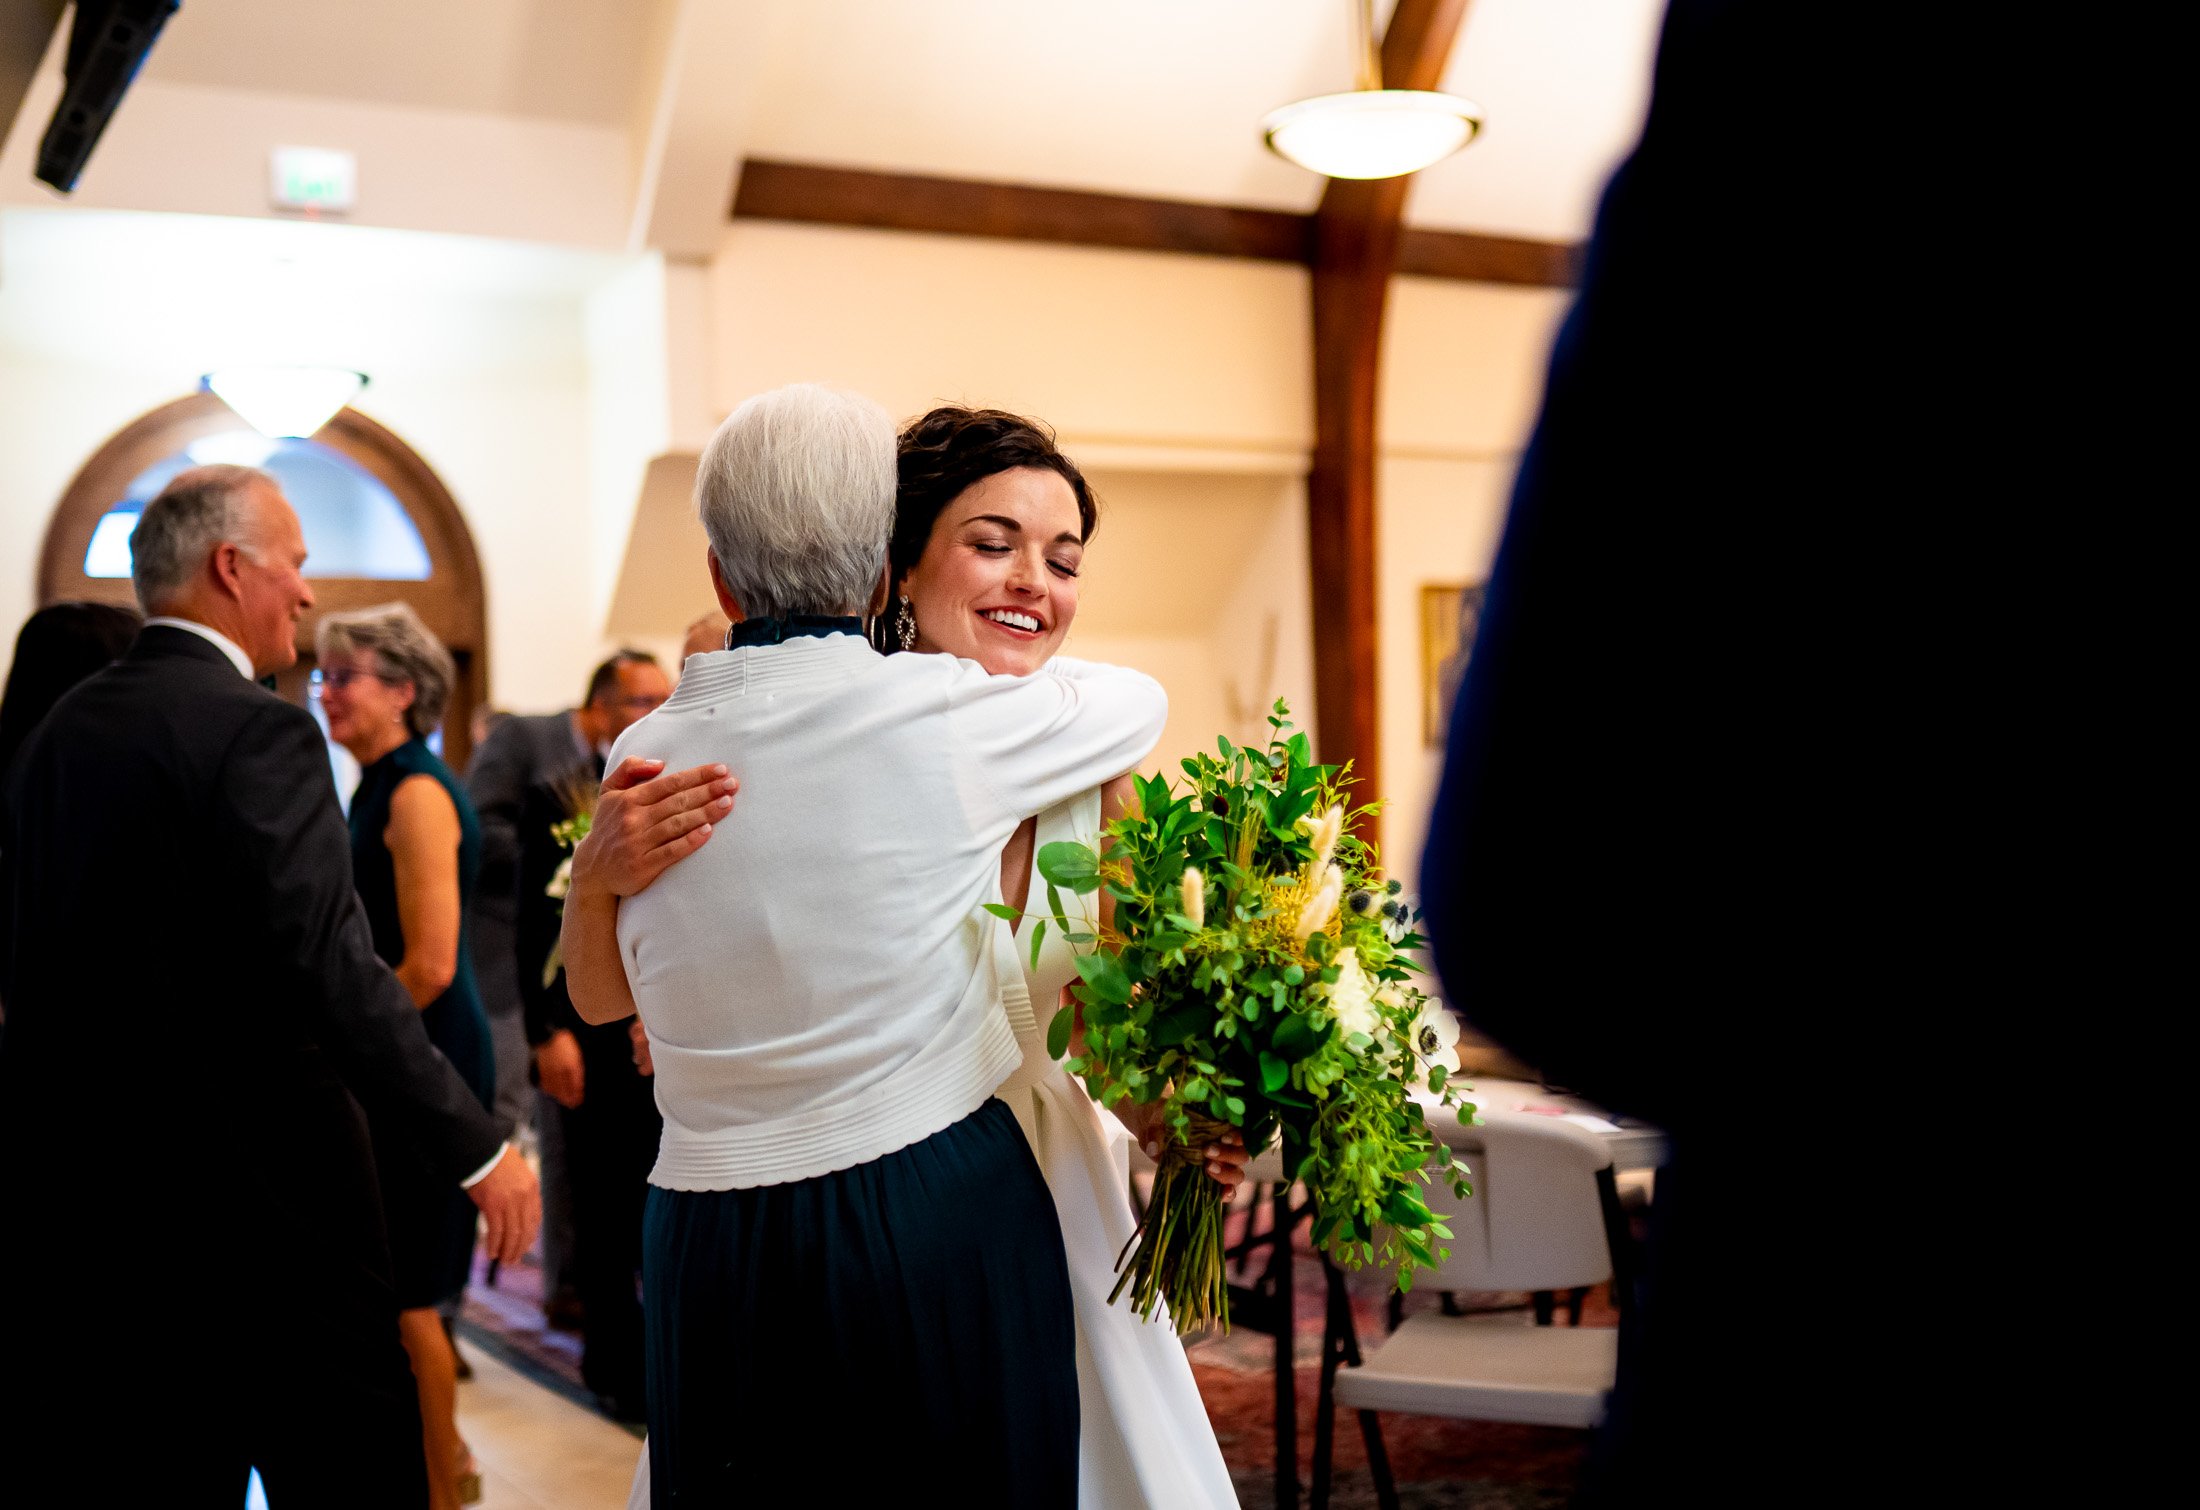 Bride hugs a guest after her catholic wedding ceremony at the church, wedding, wedding photos, wedding photography, wedding photographer, wedding inspiration, wedding photo inspiration, wedding portraits, wedding ceremony, wedding reception, mountain wedding, Catholic Church wedding, Catholic Church wedding photos, Catholic Church wedding photography, Catholic Church wedding photographer, Catholic Church wedding inspiration, Catholic Church wedding venue, Steamboat Springs wedding, Steamboat Springs wedding photos, Steamboat Springs wedding photography, Steamboat Springs wedding photographer, Colorado wedding, Colorado wedding photos, Colorado wedding photography, Colorado wedding photographer, Colorado mountain wedding, Colorado wedding inspiration